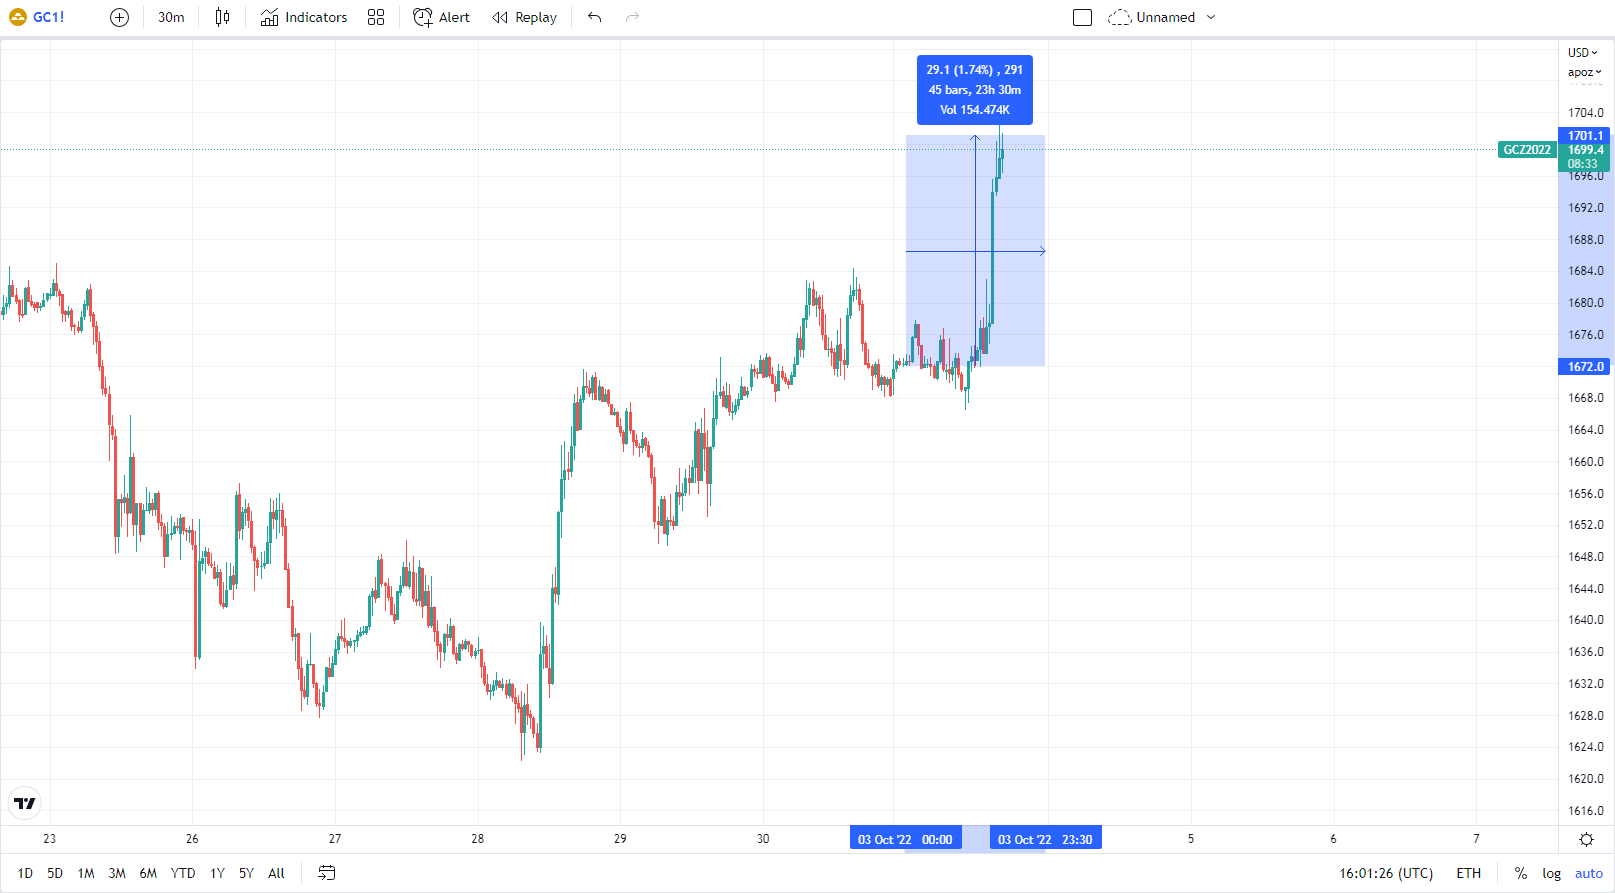 30 minutes chart of GC (Gold Futures). Gold's reaction to weak macro data. Source: tradingview.com